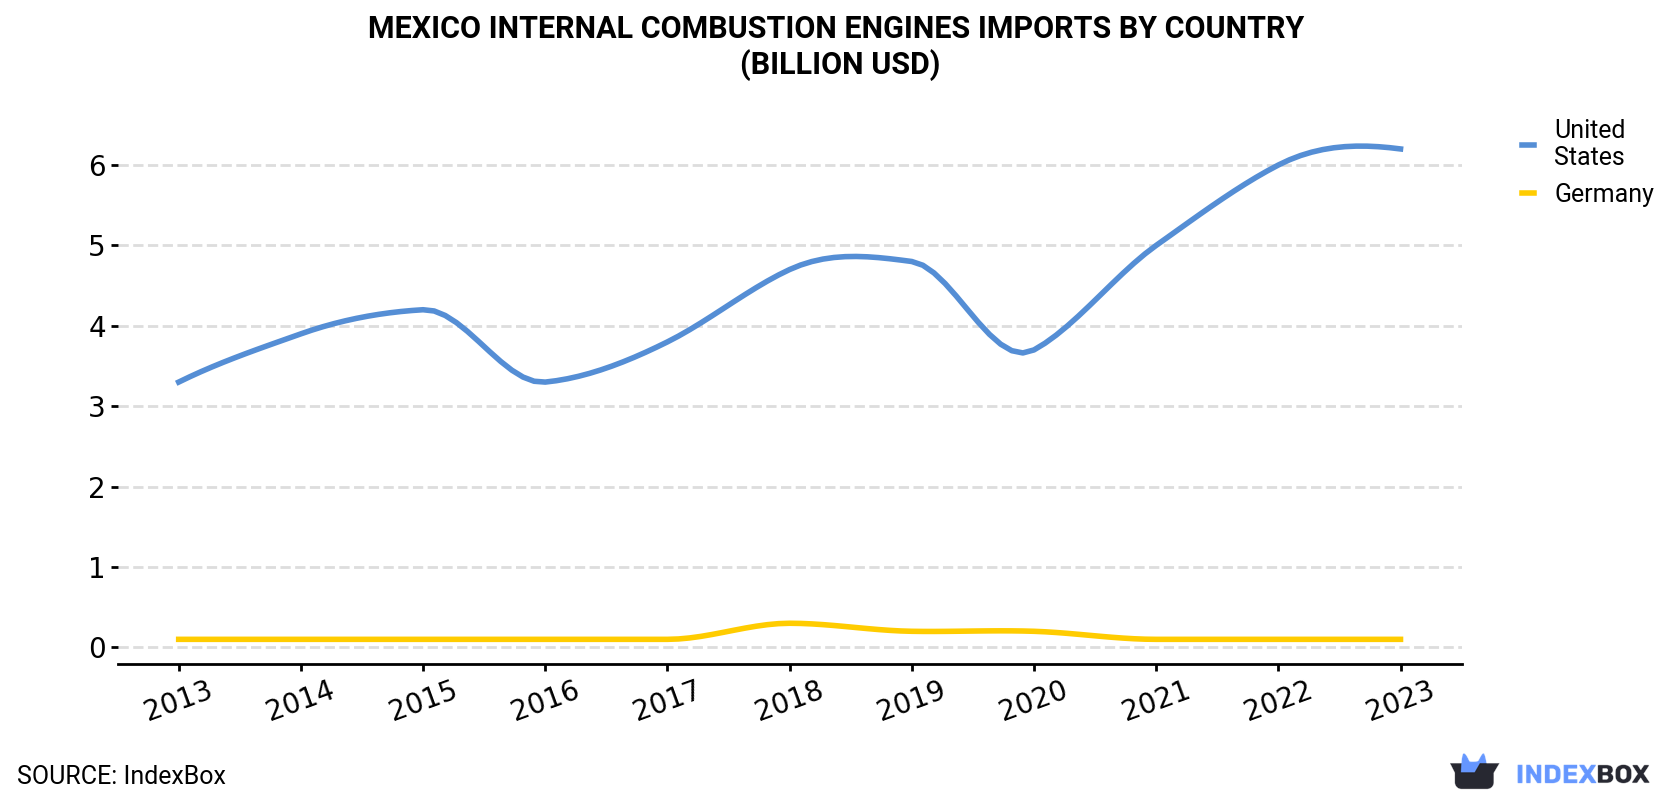 Mexico Internal Combustion Engines Imports By Country (Billion USD)